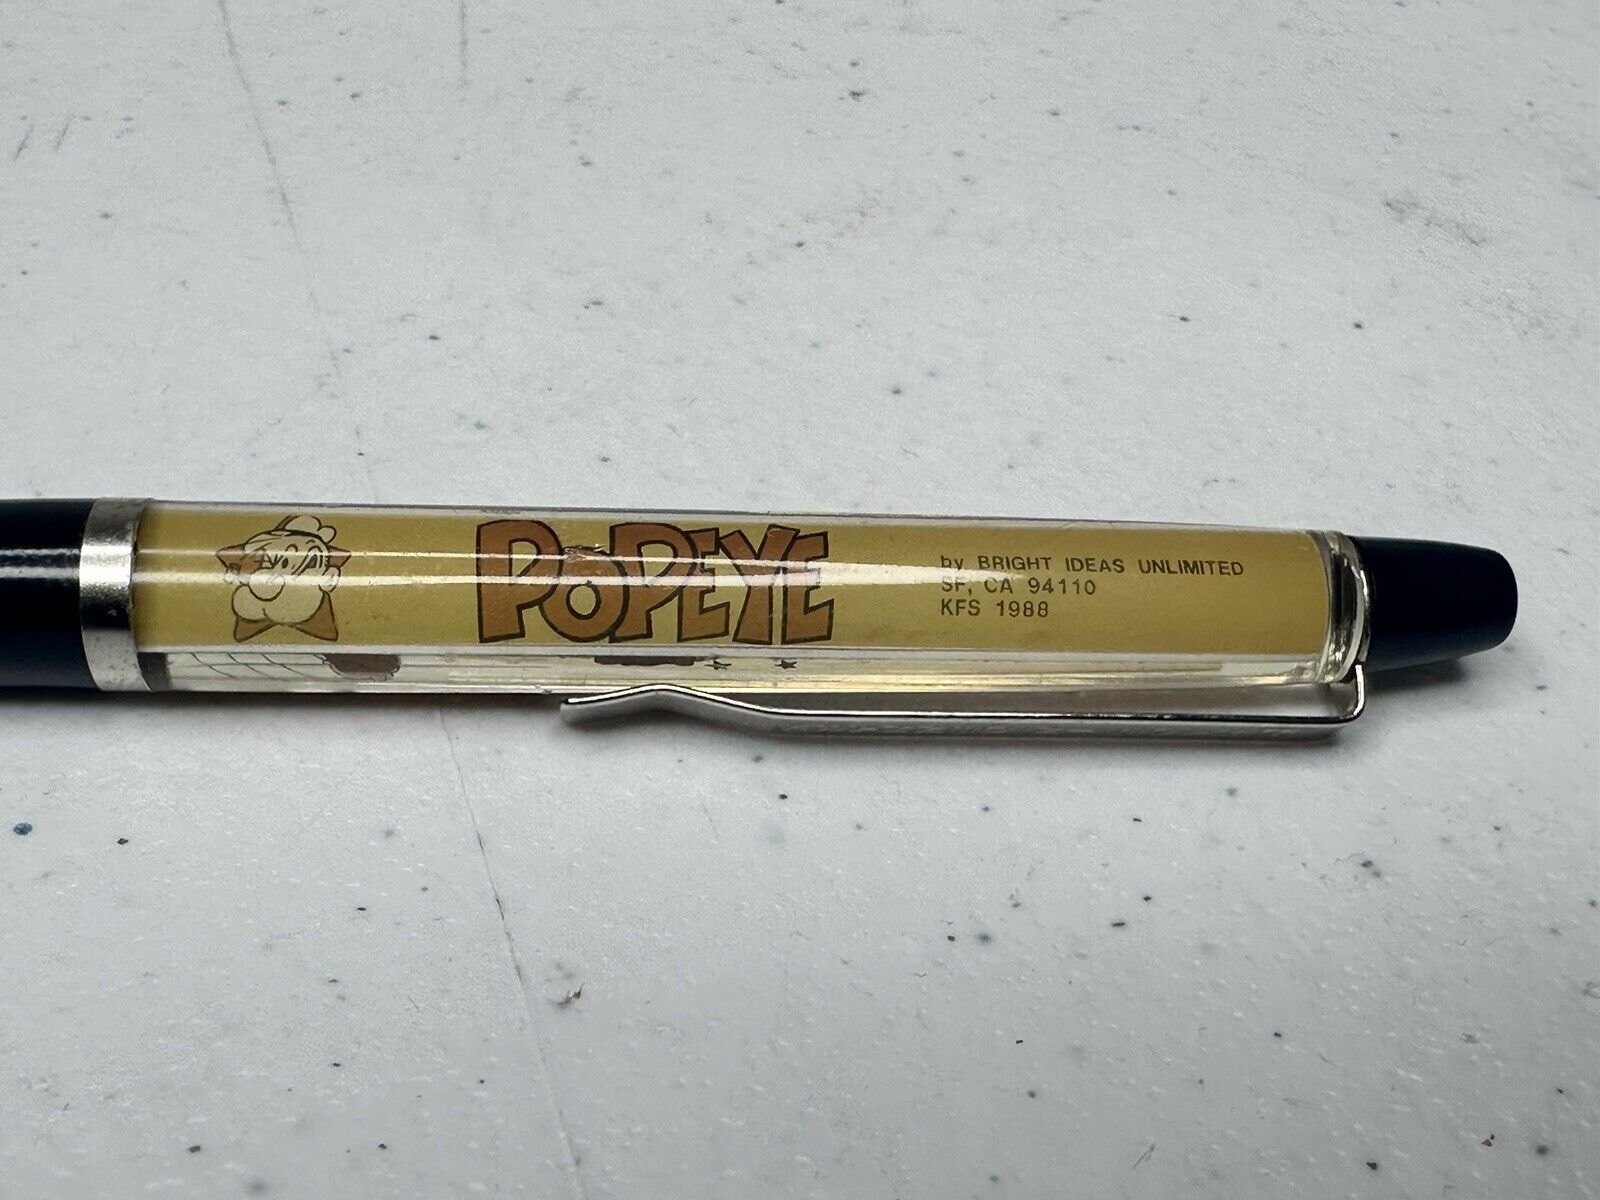 Rare Vintage 1988 Popeye & Brutus Floaty Pen - Nostalgic Collectible by Bright Ideas Unlimited - TreasuTiques